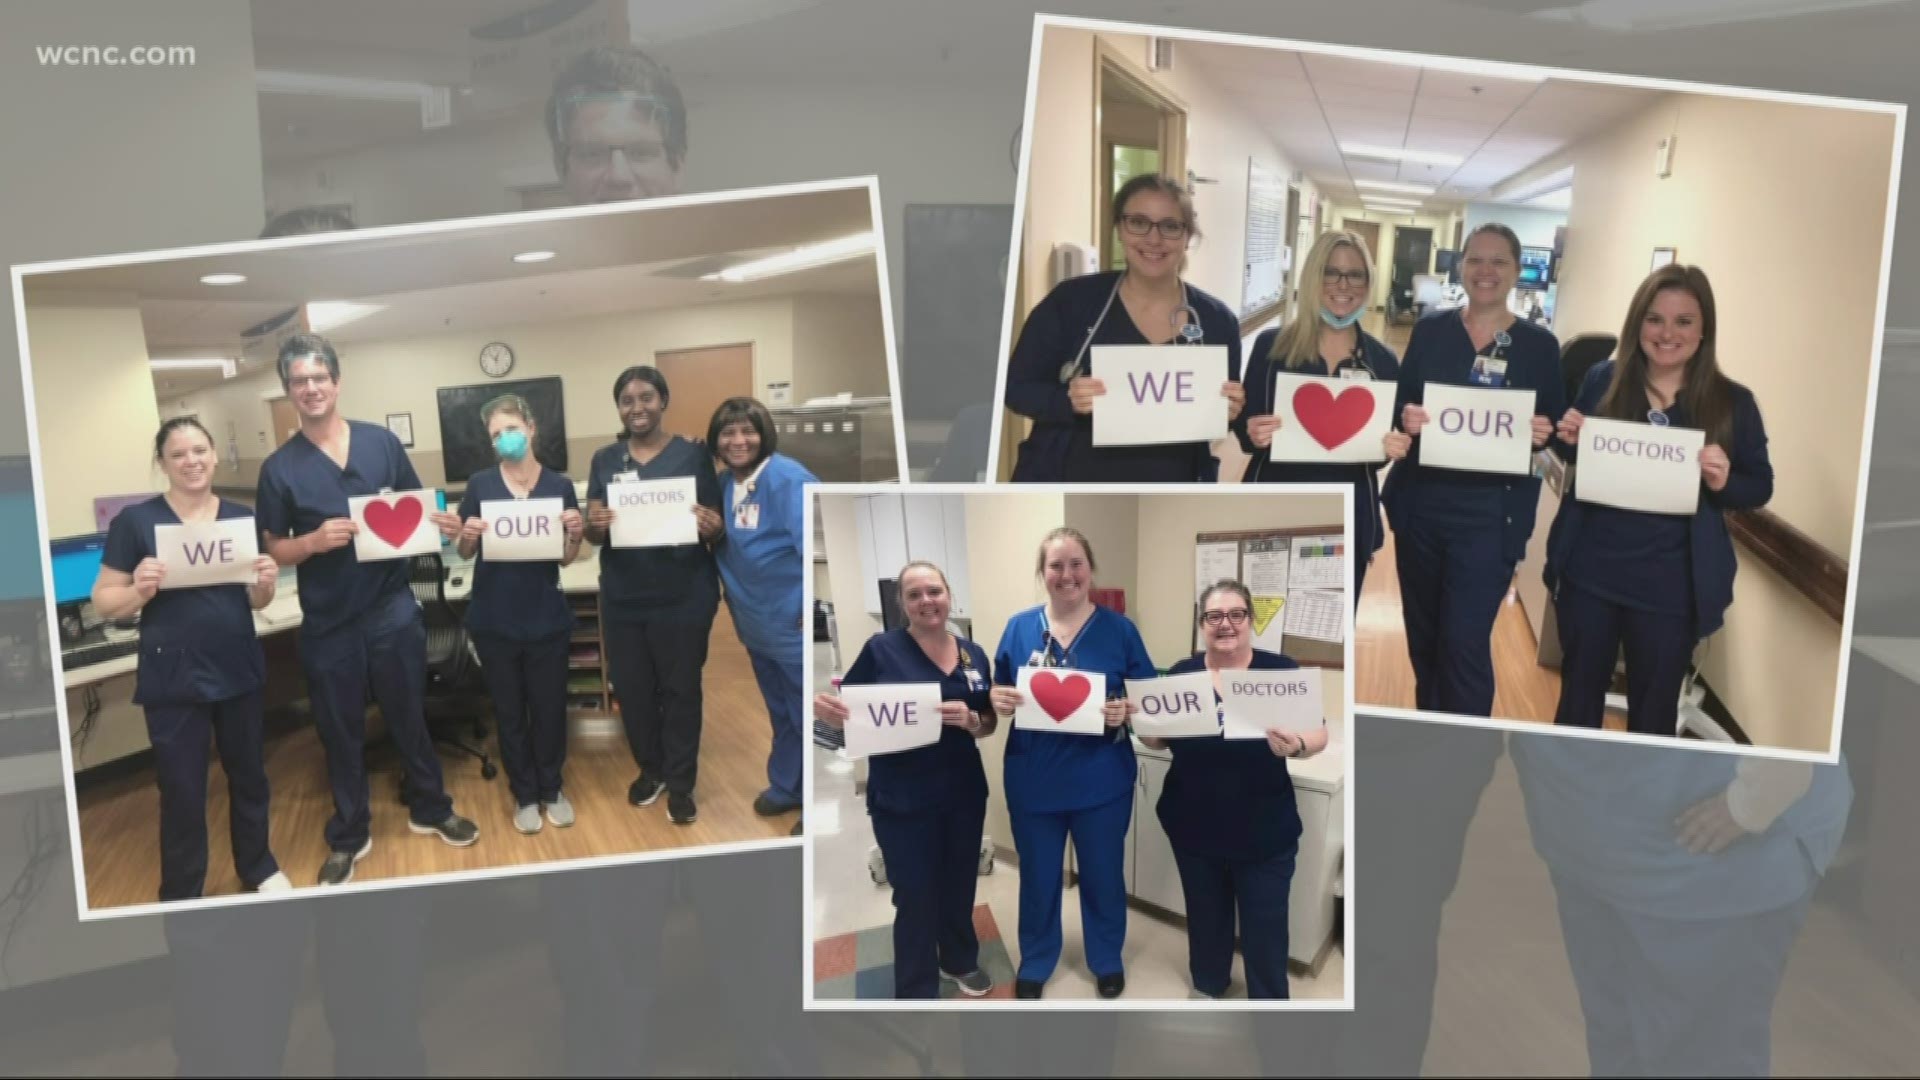 From food deliveries to inspirational chalk messages, people in the area are hoping to show doctors and healthcare workers that they are appreciated.